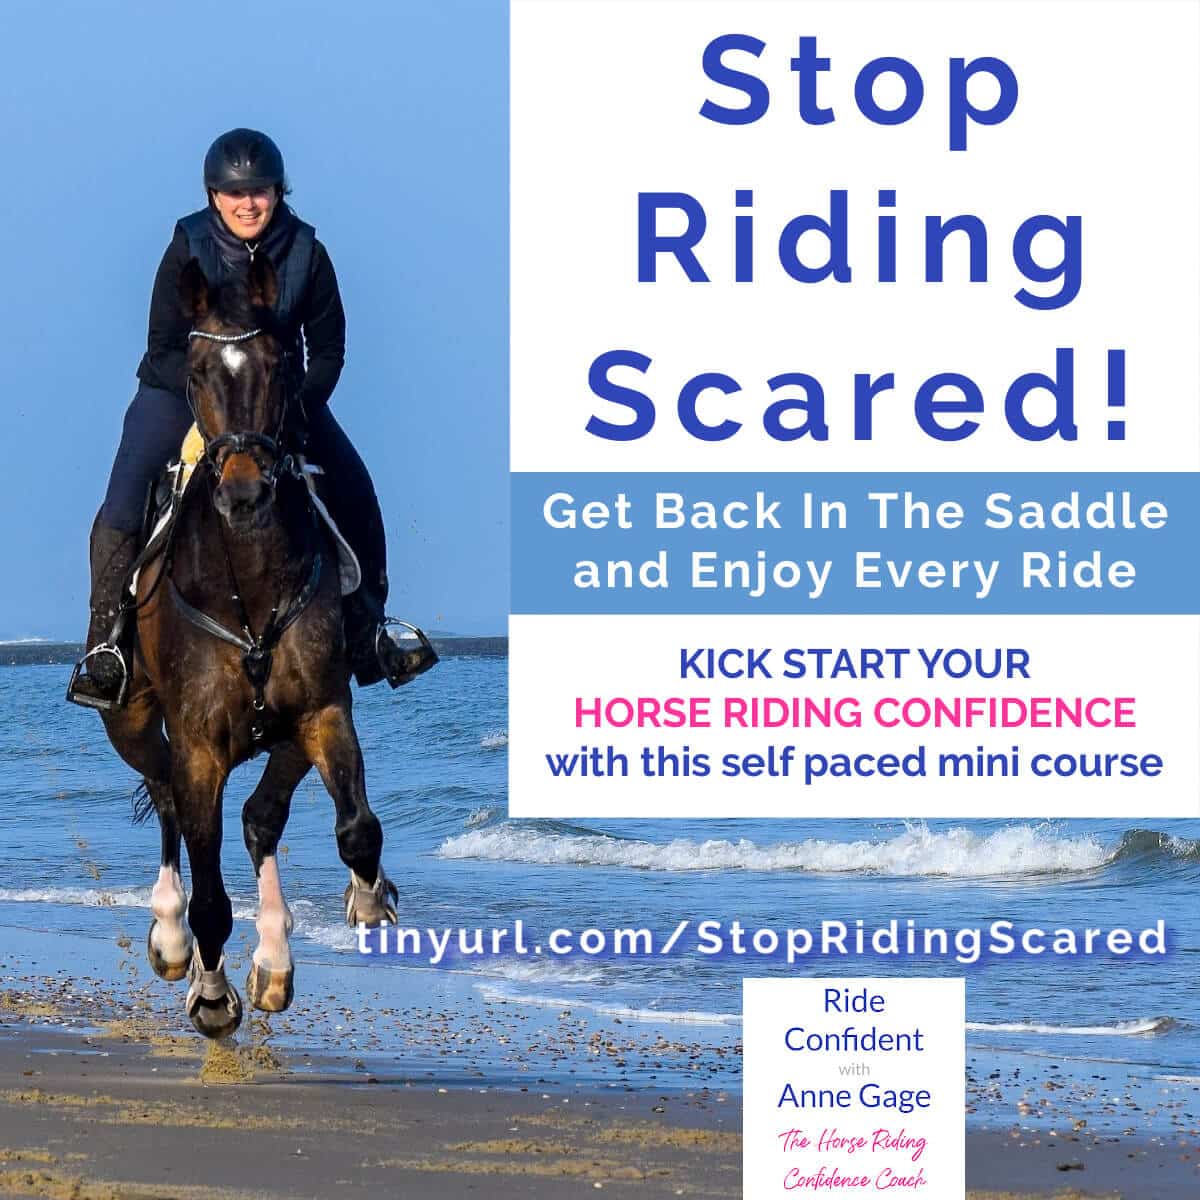 Returning To Horse Riding Confidently After Time Off